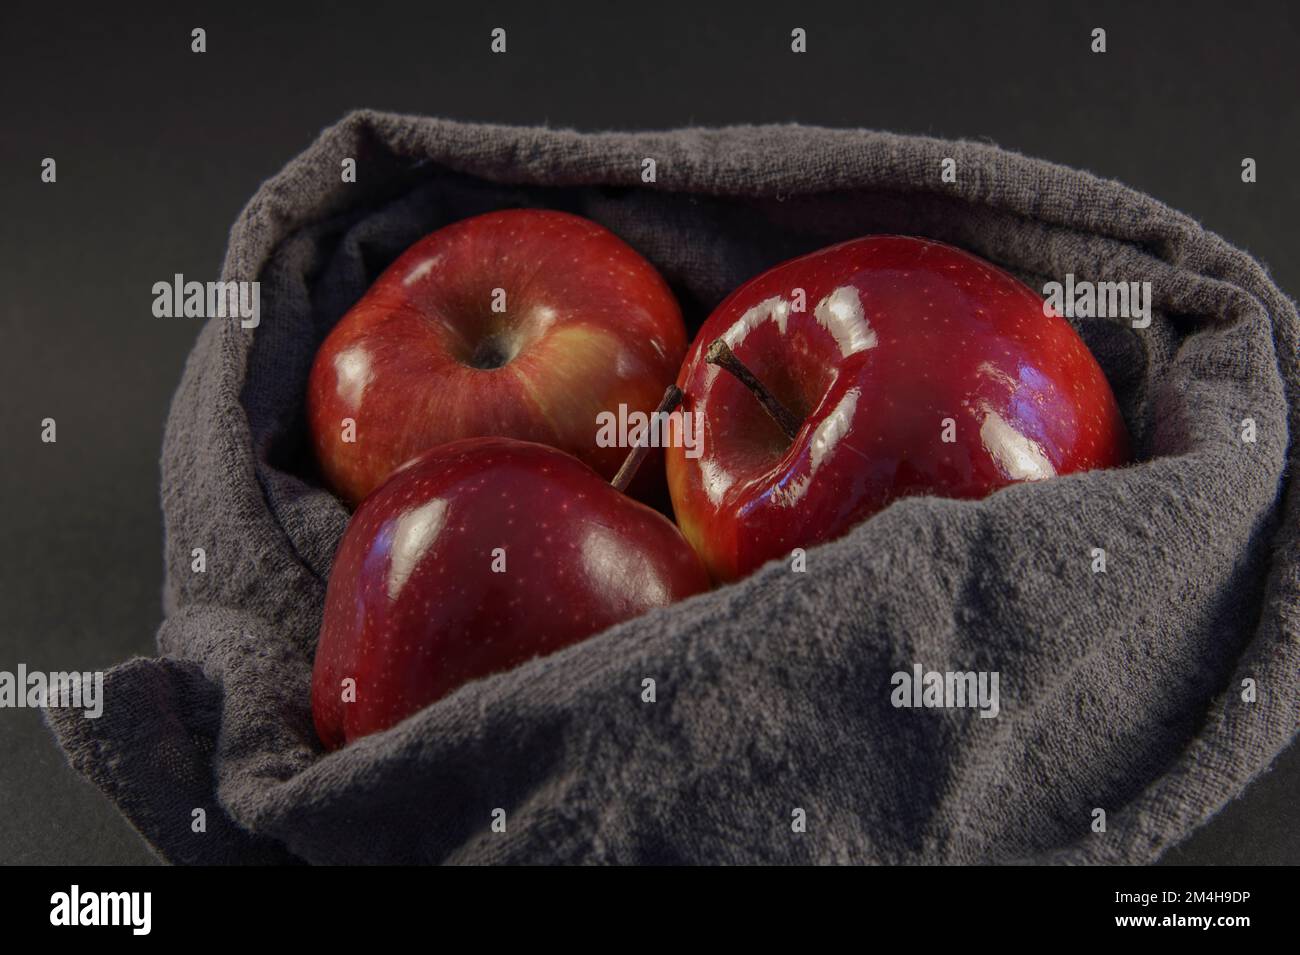 Three glosy delicious red apples in a gray basket against the dark background Stock Photo